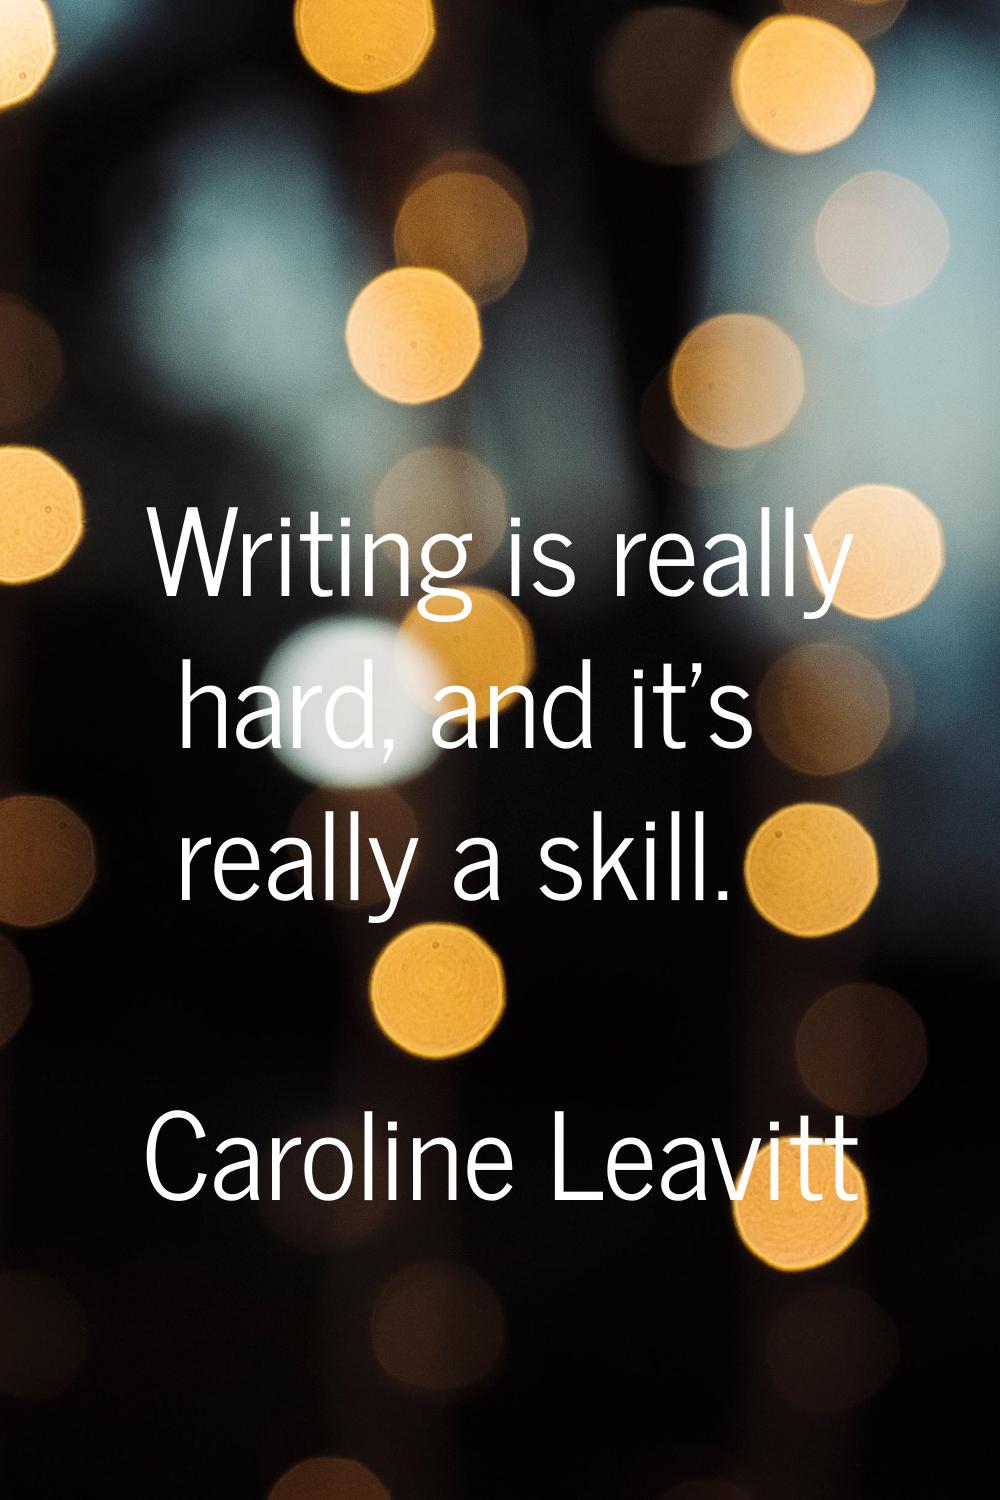 Writing is really hard, and it's really a skill.